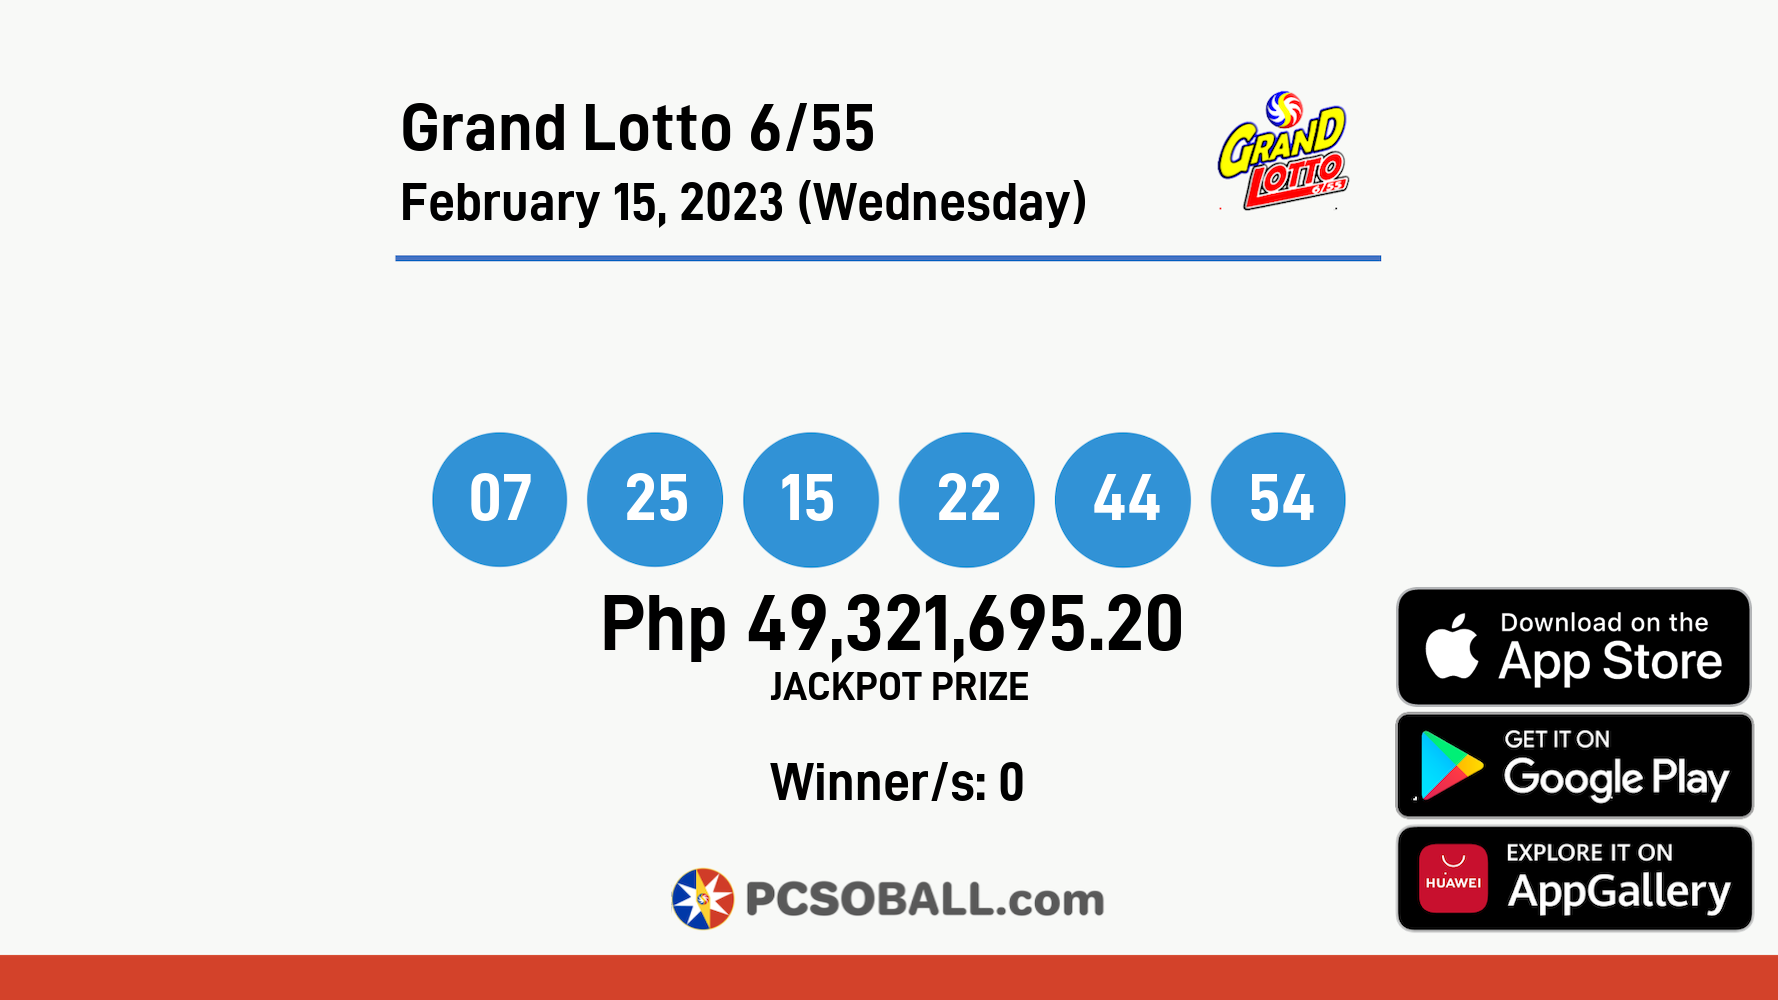 Grand Lotto 6/55 February 15, 2023 (Wednesday) Result